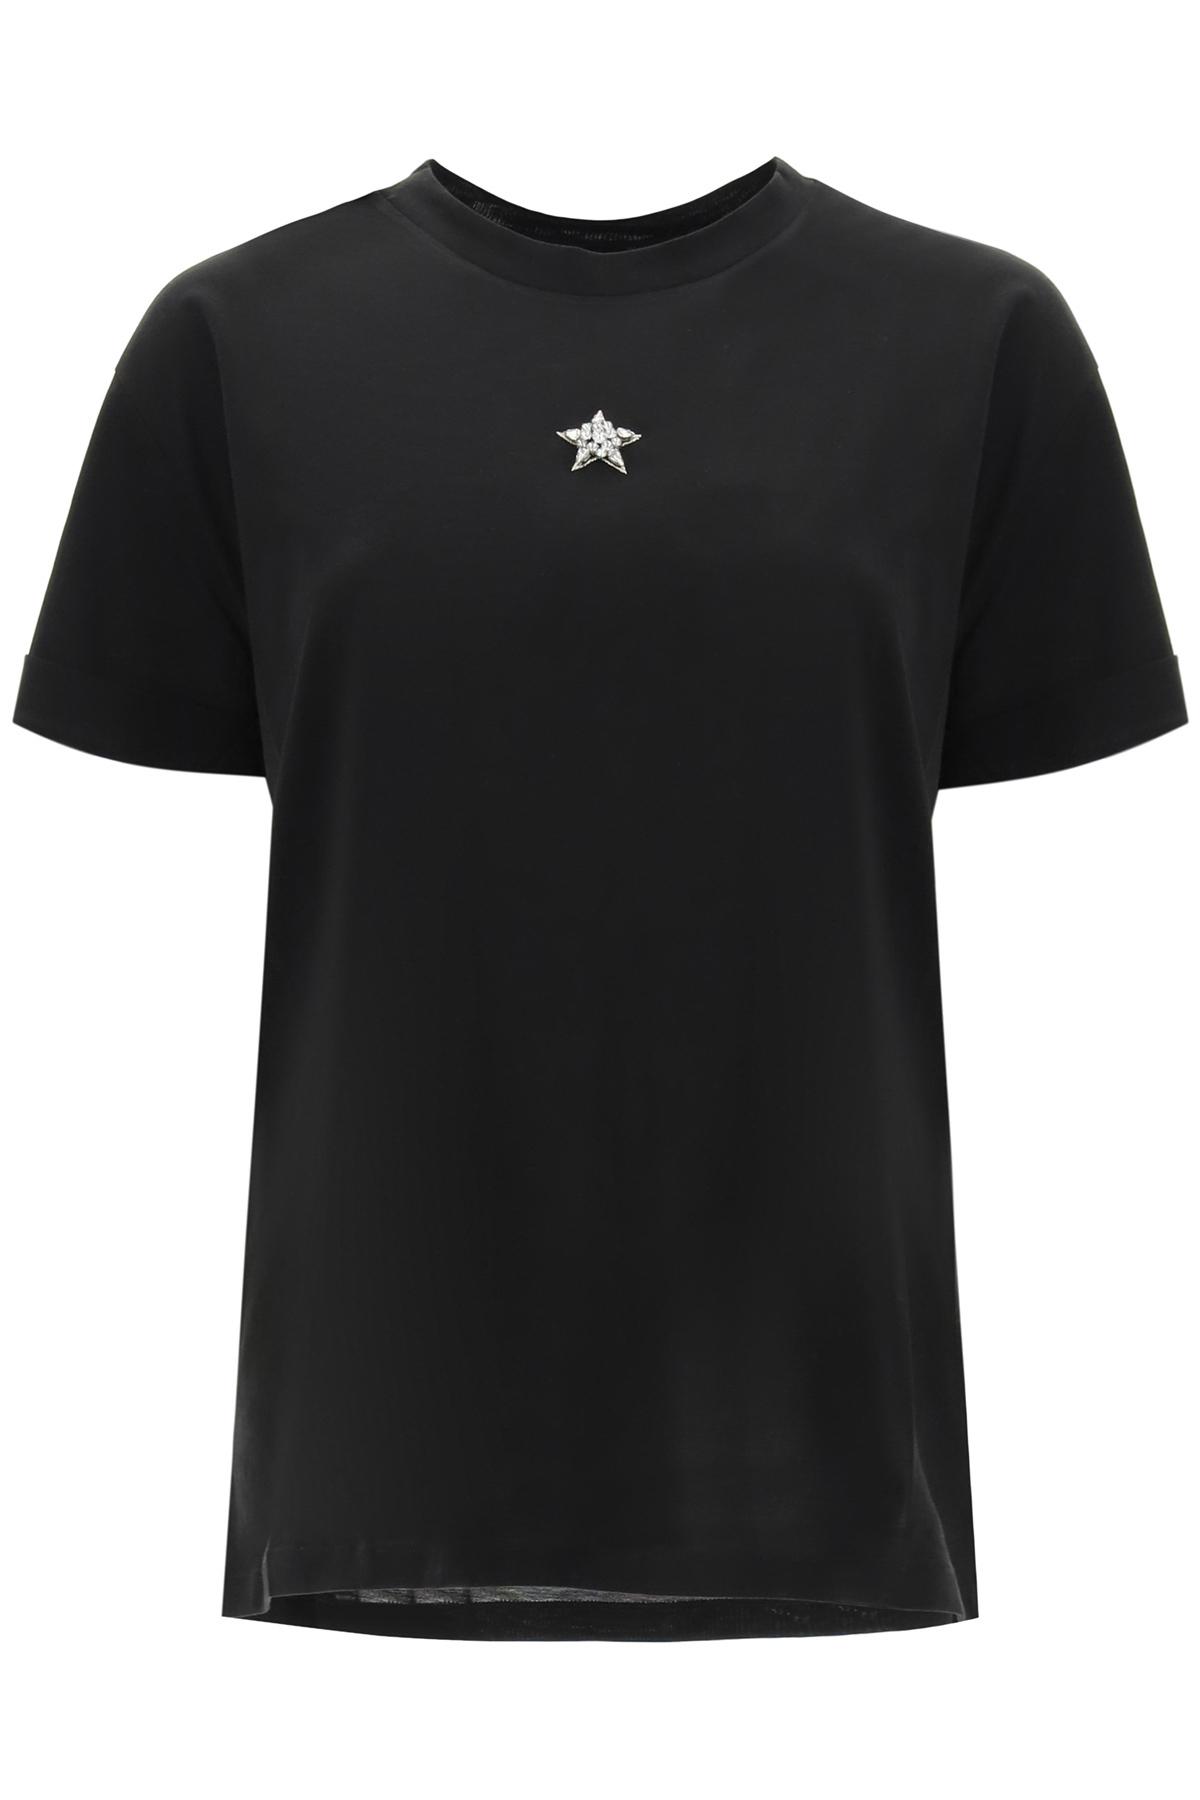 STELLA McCARTNEY T-SHIRT MINISTAR EMBROIDERY WITH CRYSTALS